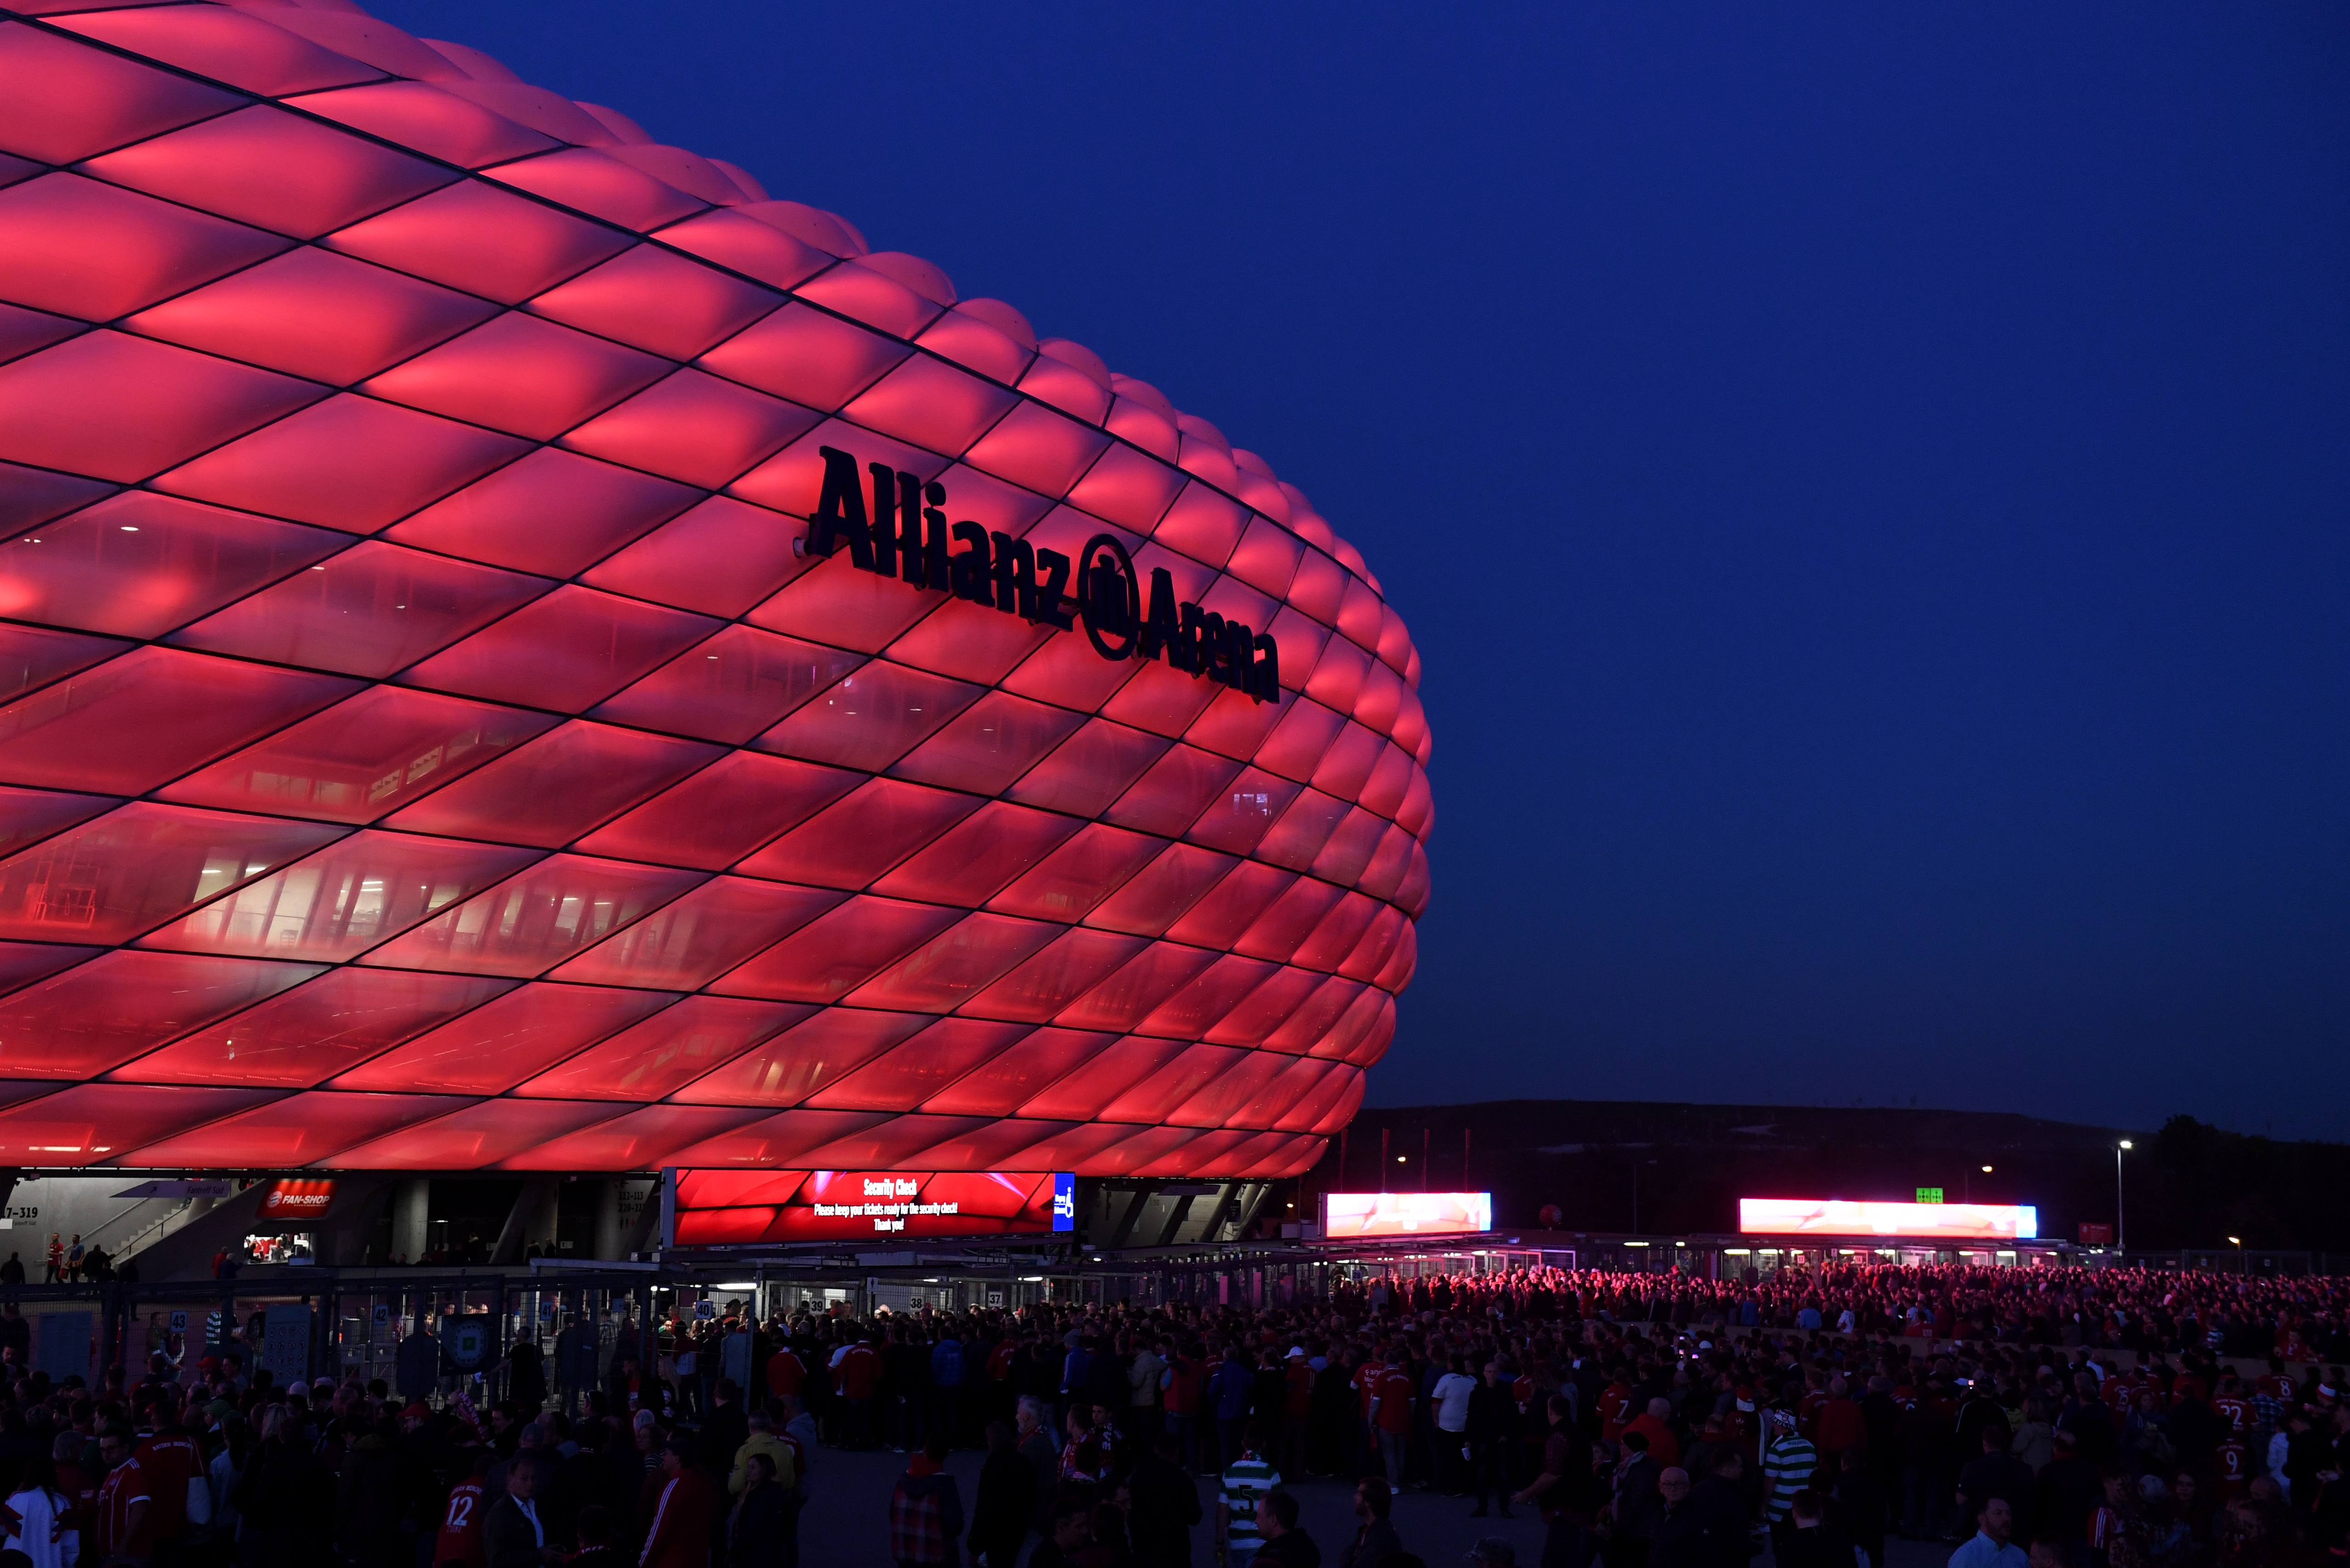 Allianz Arena: Munich will host the opening game.